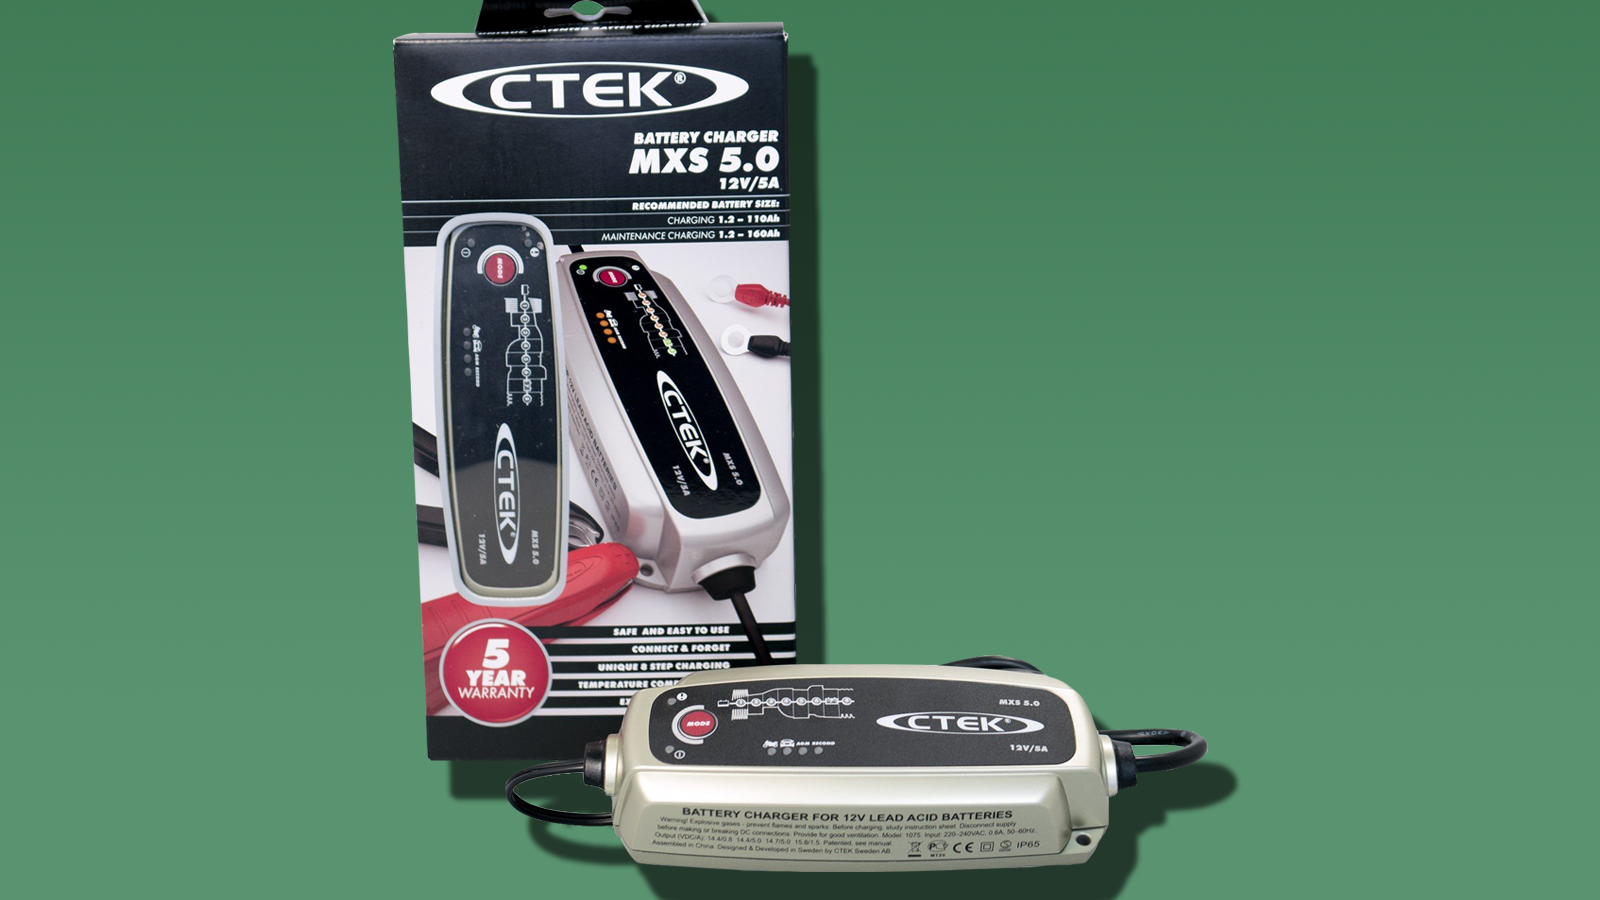 CTEK Battery Chargers Are The Perfect Holiday Gift For Everyone On Your List